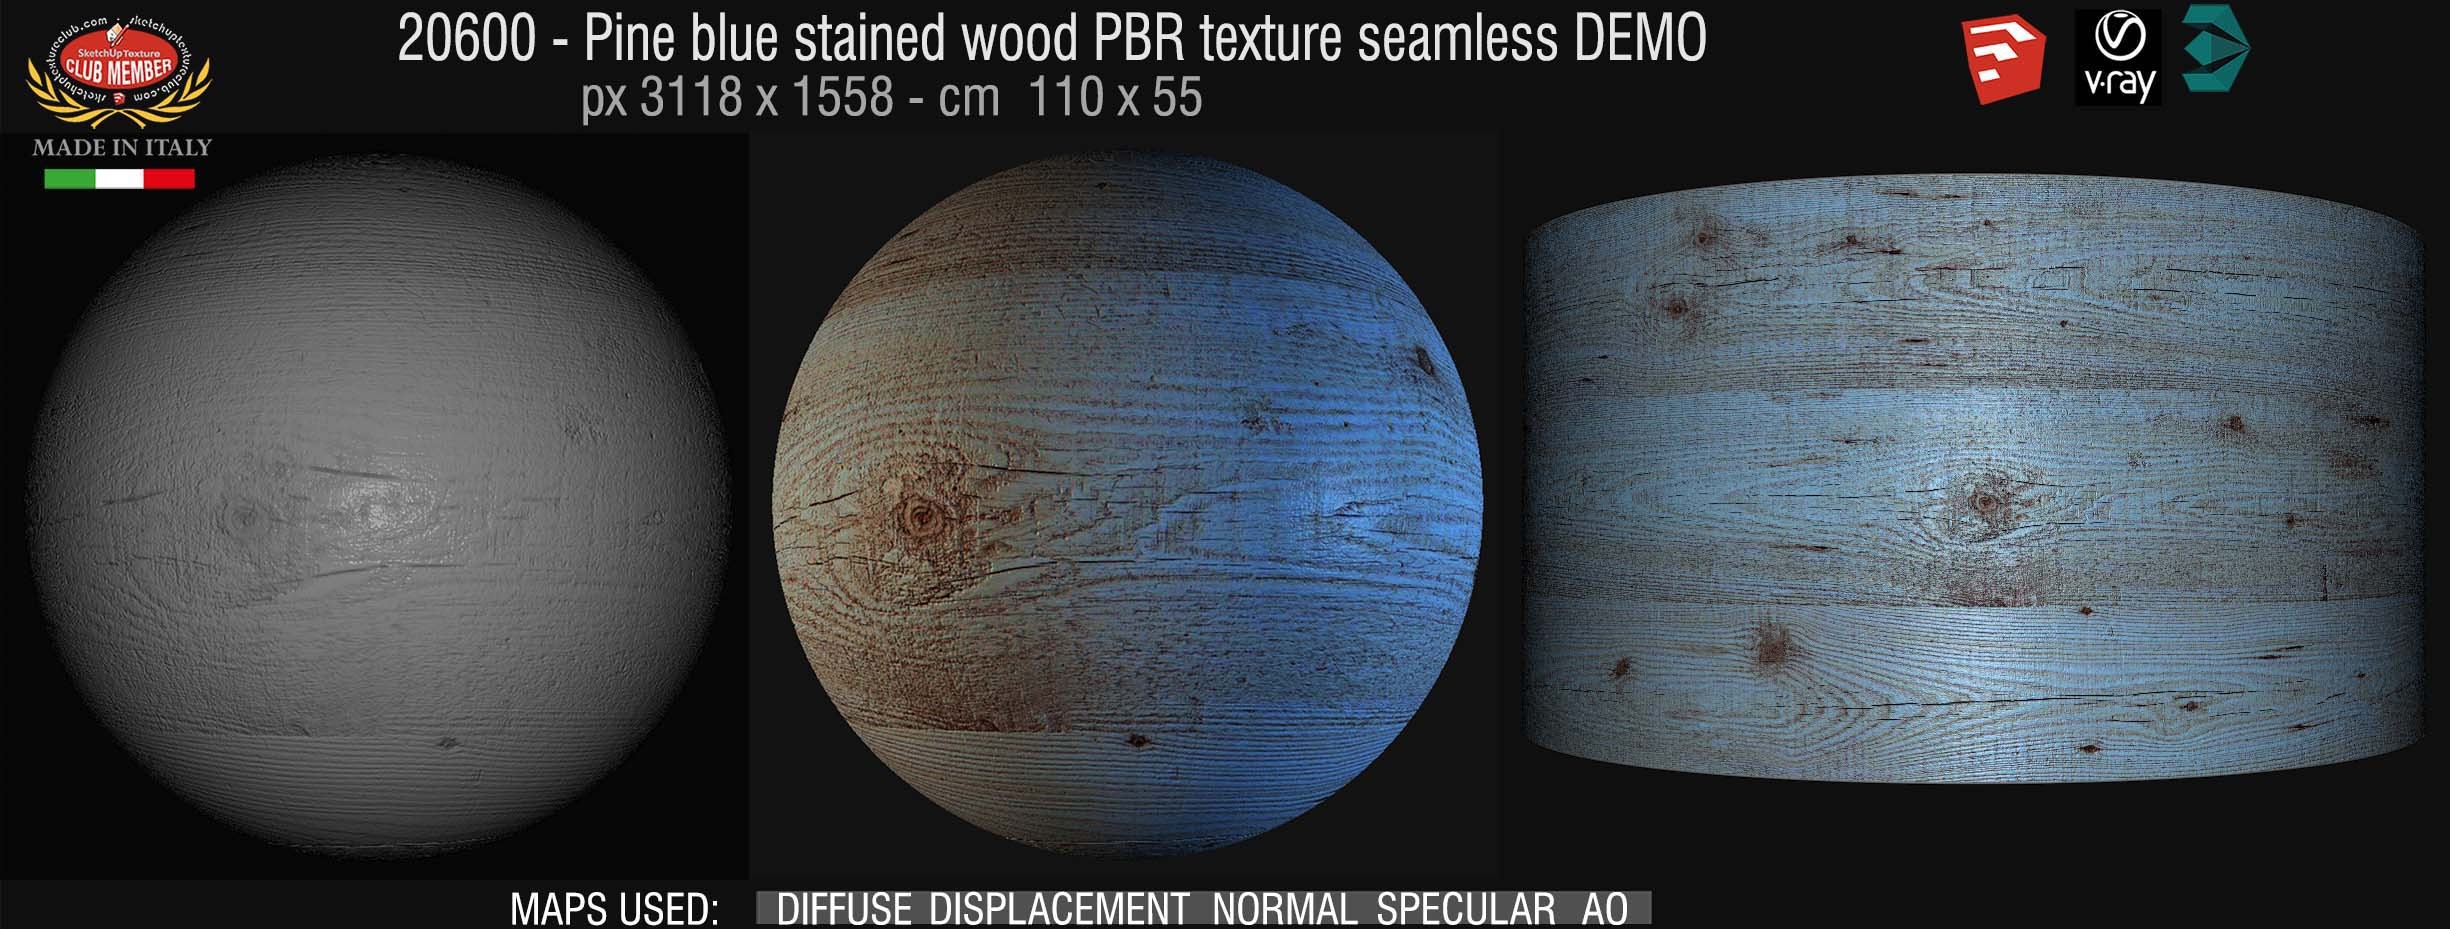 20600 pine blue stained PBR wood texture seamless DEMO